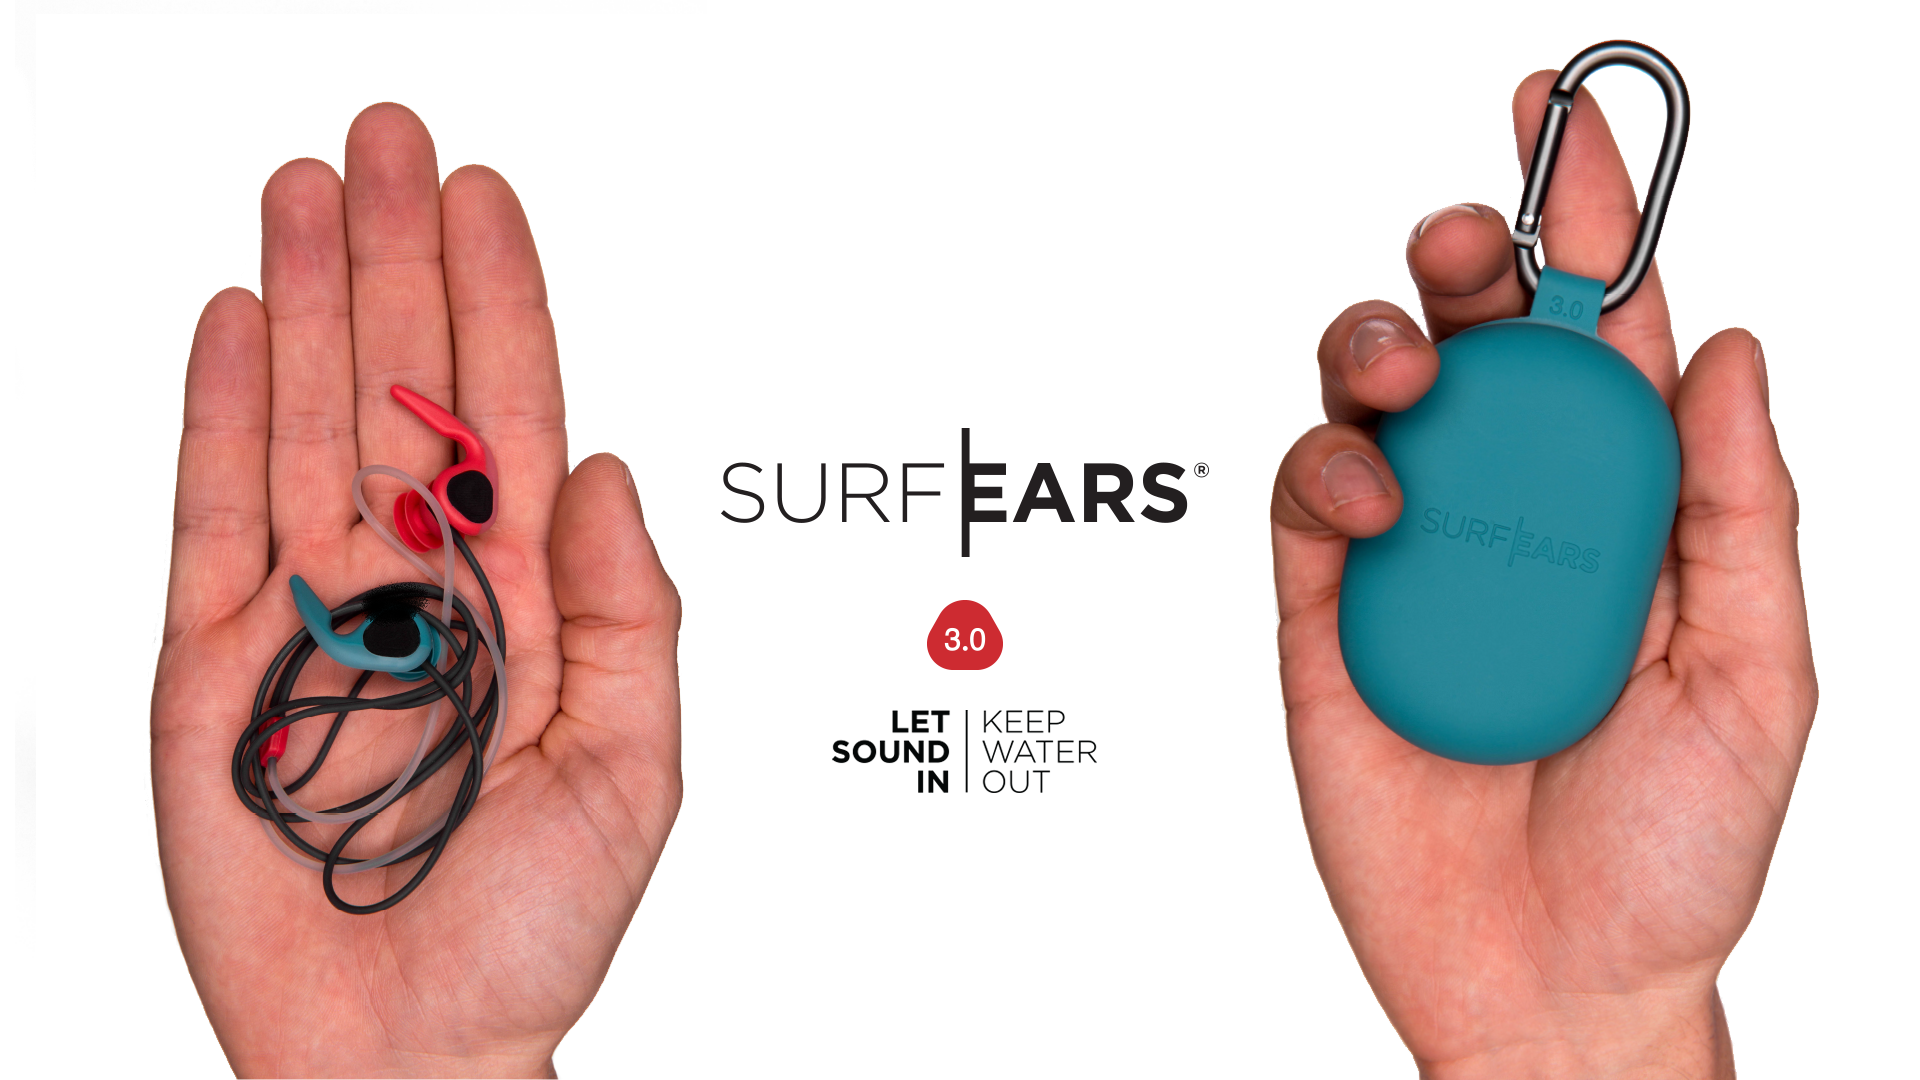 SurfEars 3.0 Ear Plugs Let Sound In and Keep Water Out